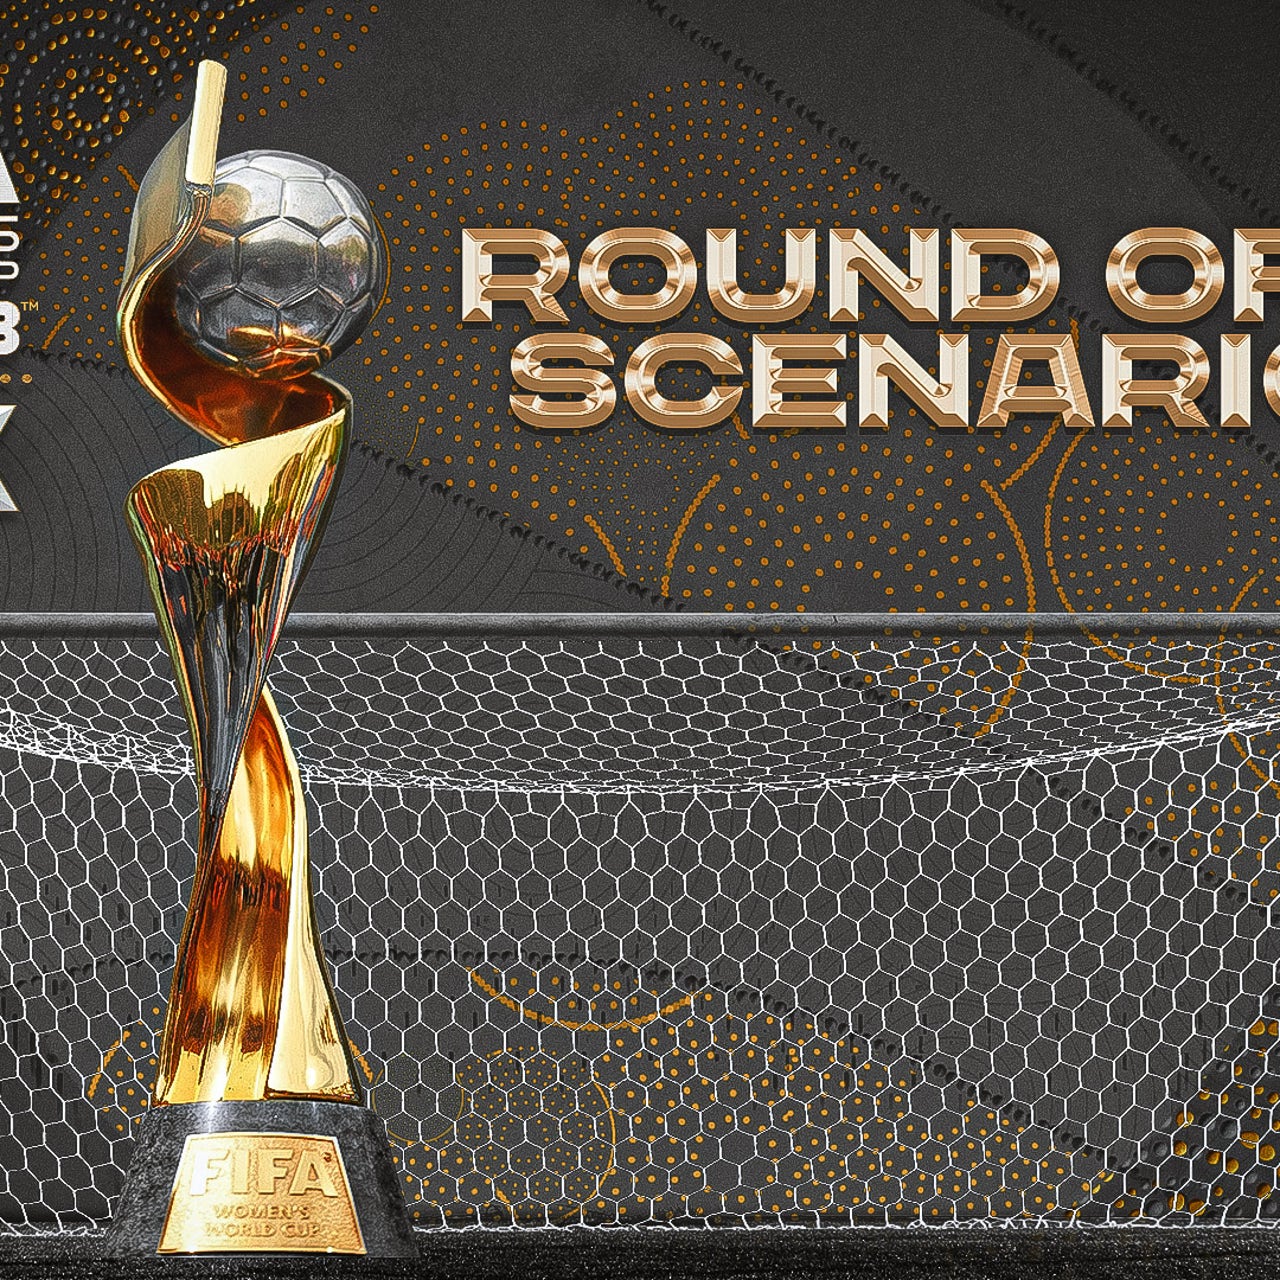 Womens World Cup group results Round of 16 is set FOX Sports